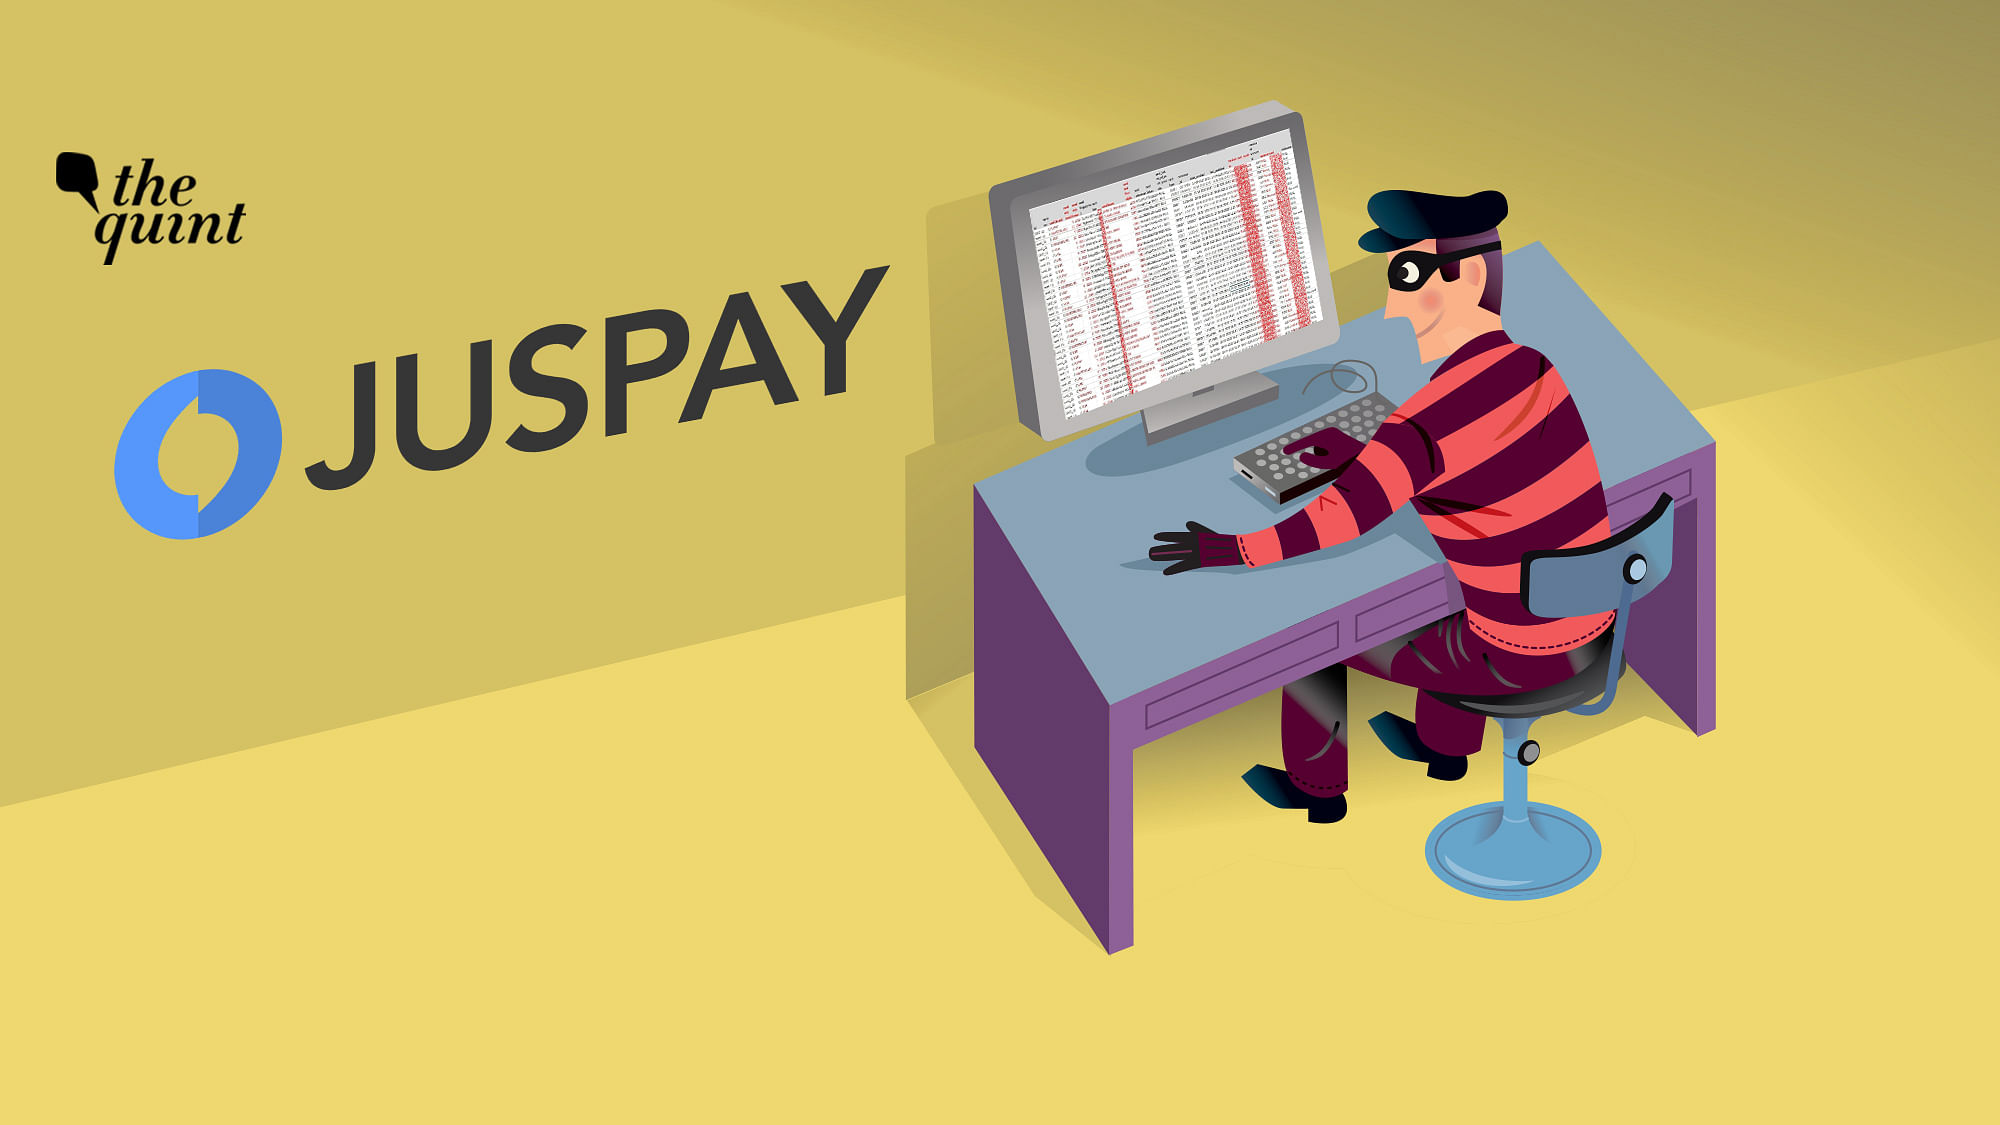 Juspay processes over 4 million payments worth Rs 1,000 core daily across platforms including Amazon, Swiggy, and Ola.